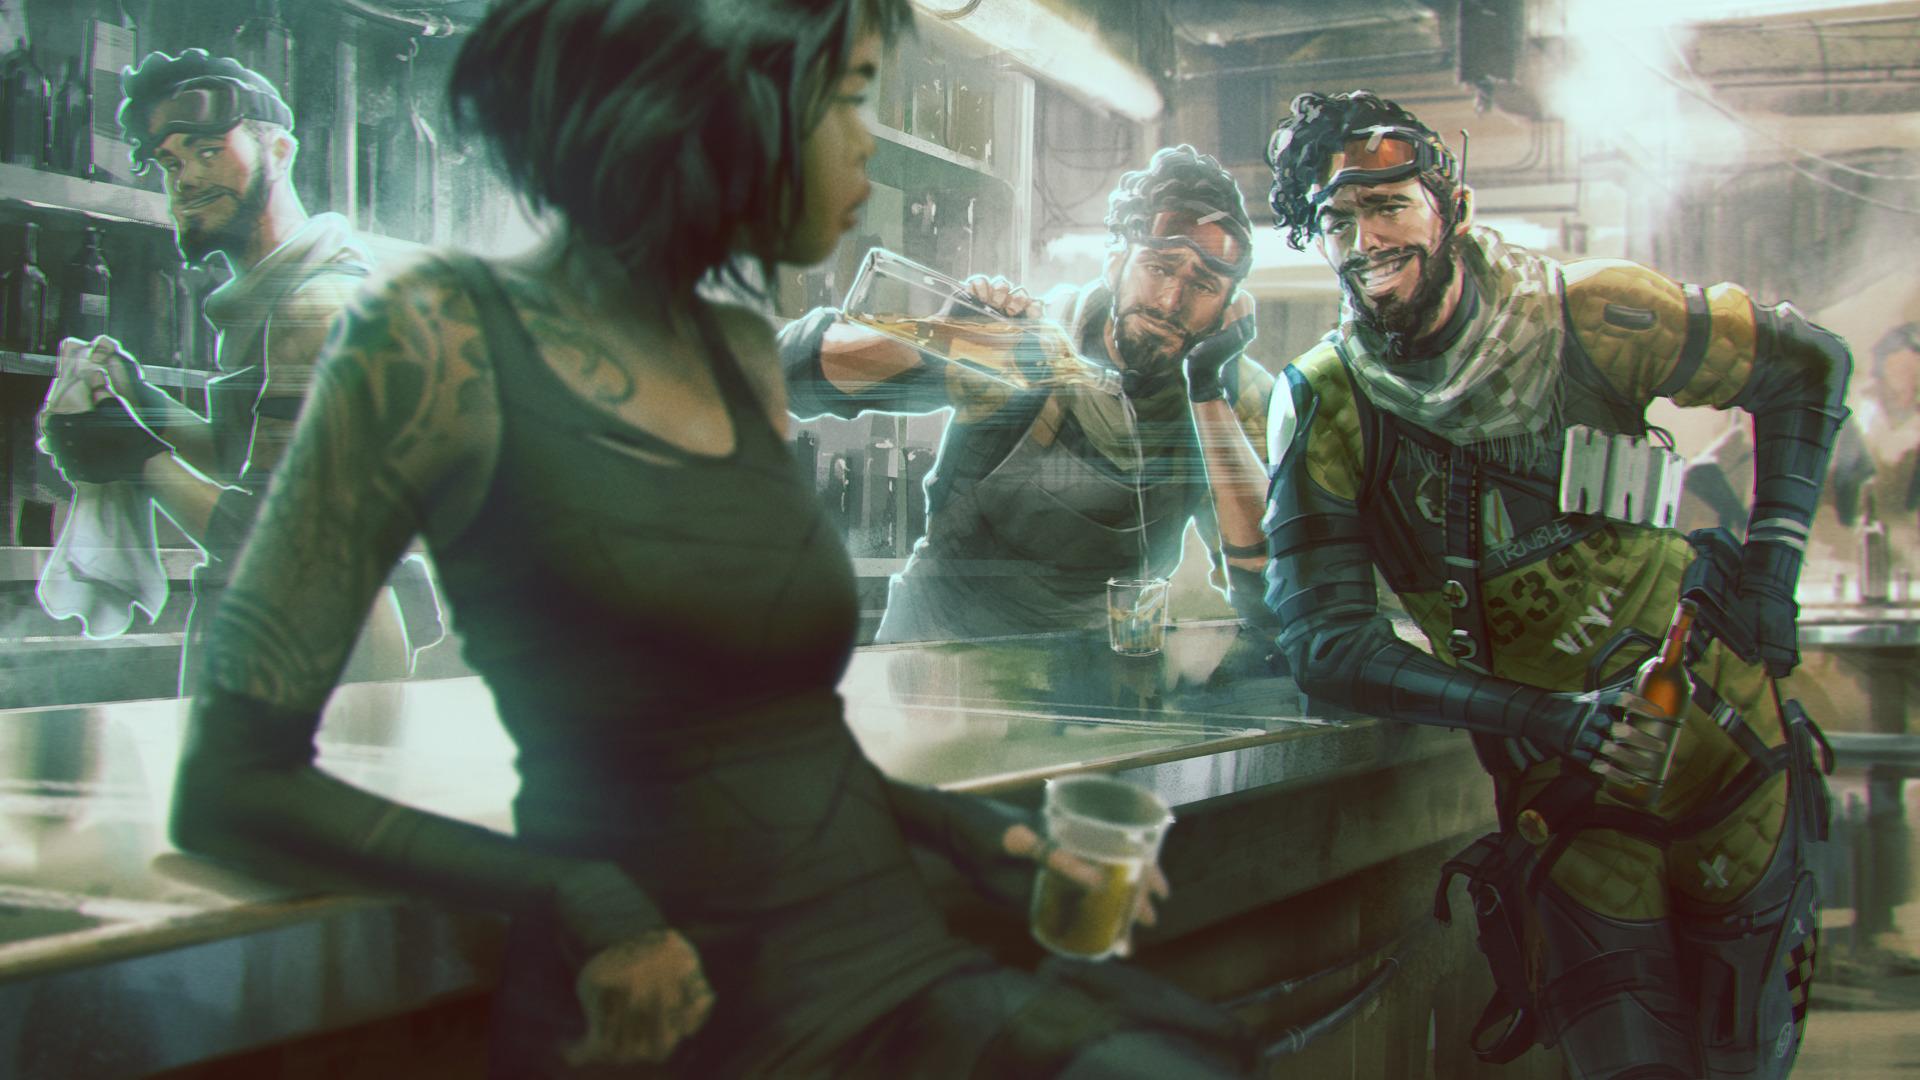 Apex Legends In Bar, HD Games, 4k Wallpapers, Image, Backgrounds